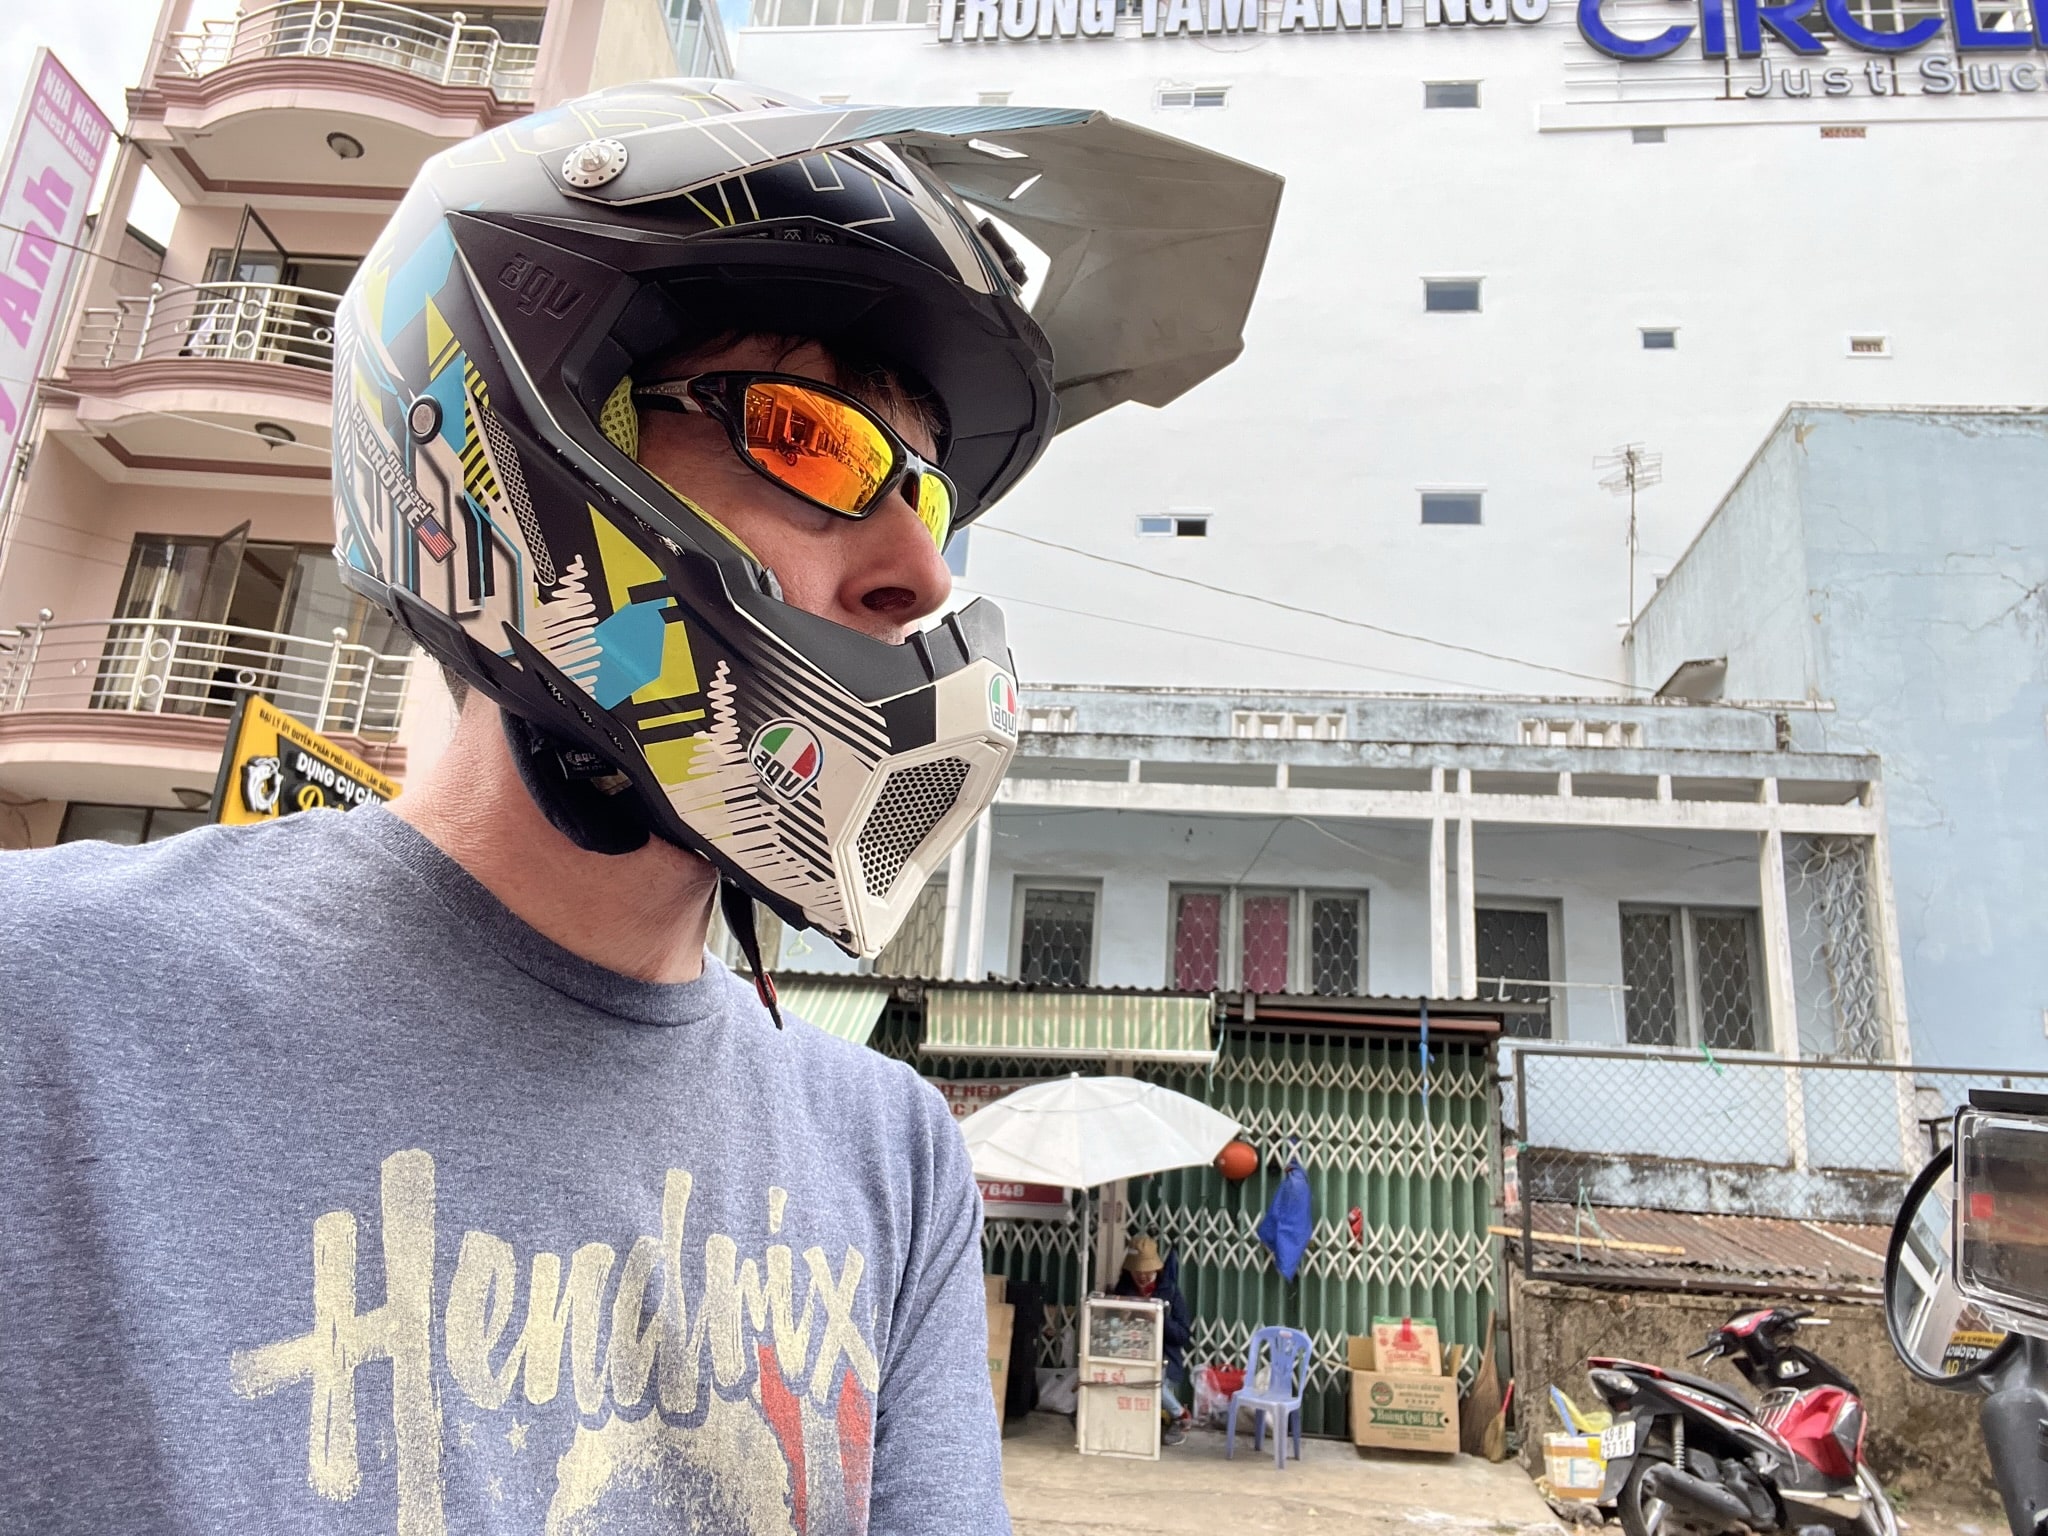 Donning my AGV AX-8 EVO helmet on the bustling streets of Thailand last year. The AX-8 has now been replaced with the AX-9, which is one of the most comfortable adventure touring helmets I have ever worn. Photo by Michael Parrotte.